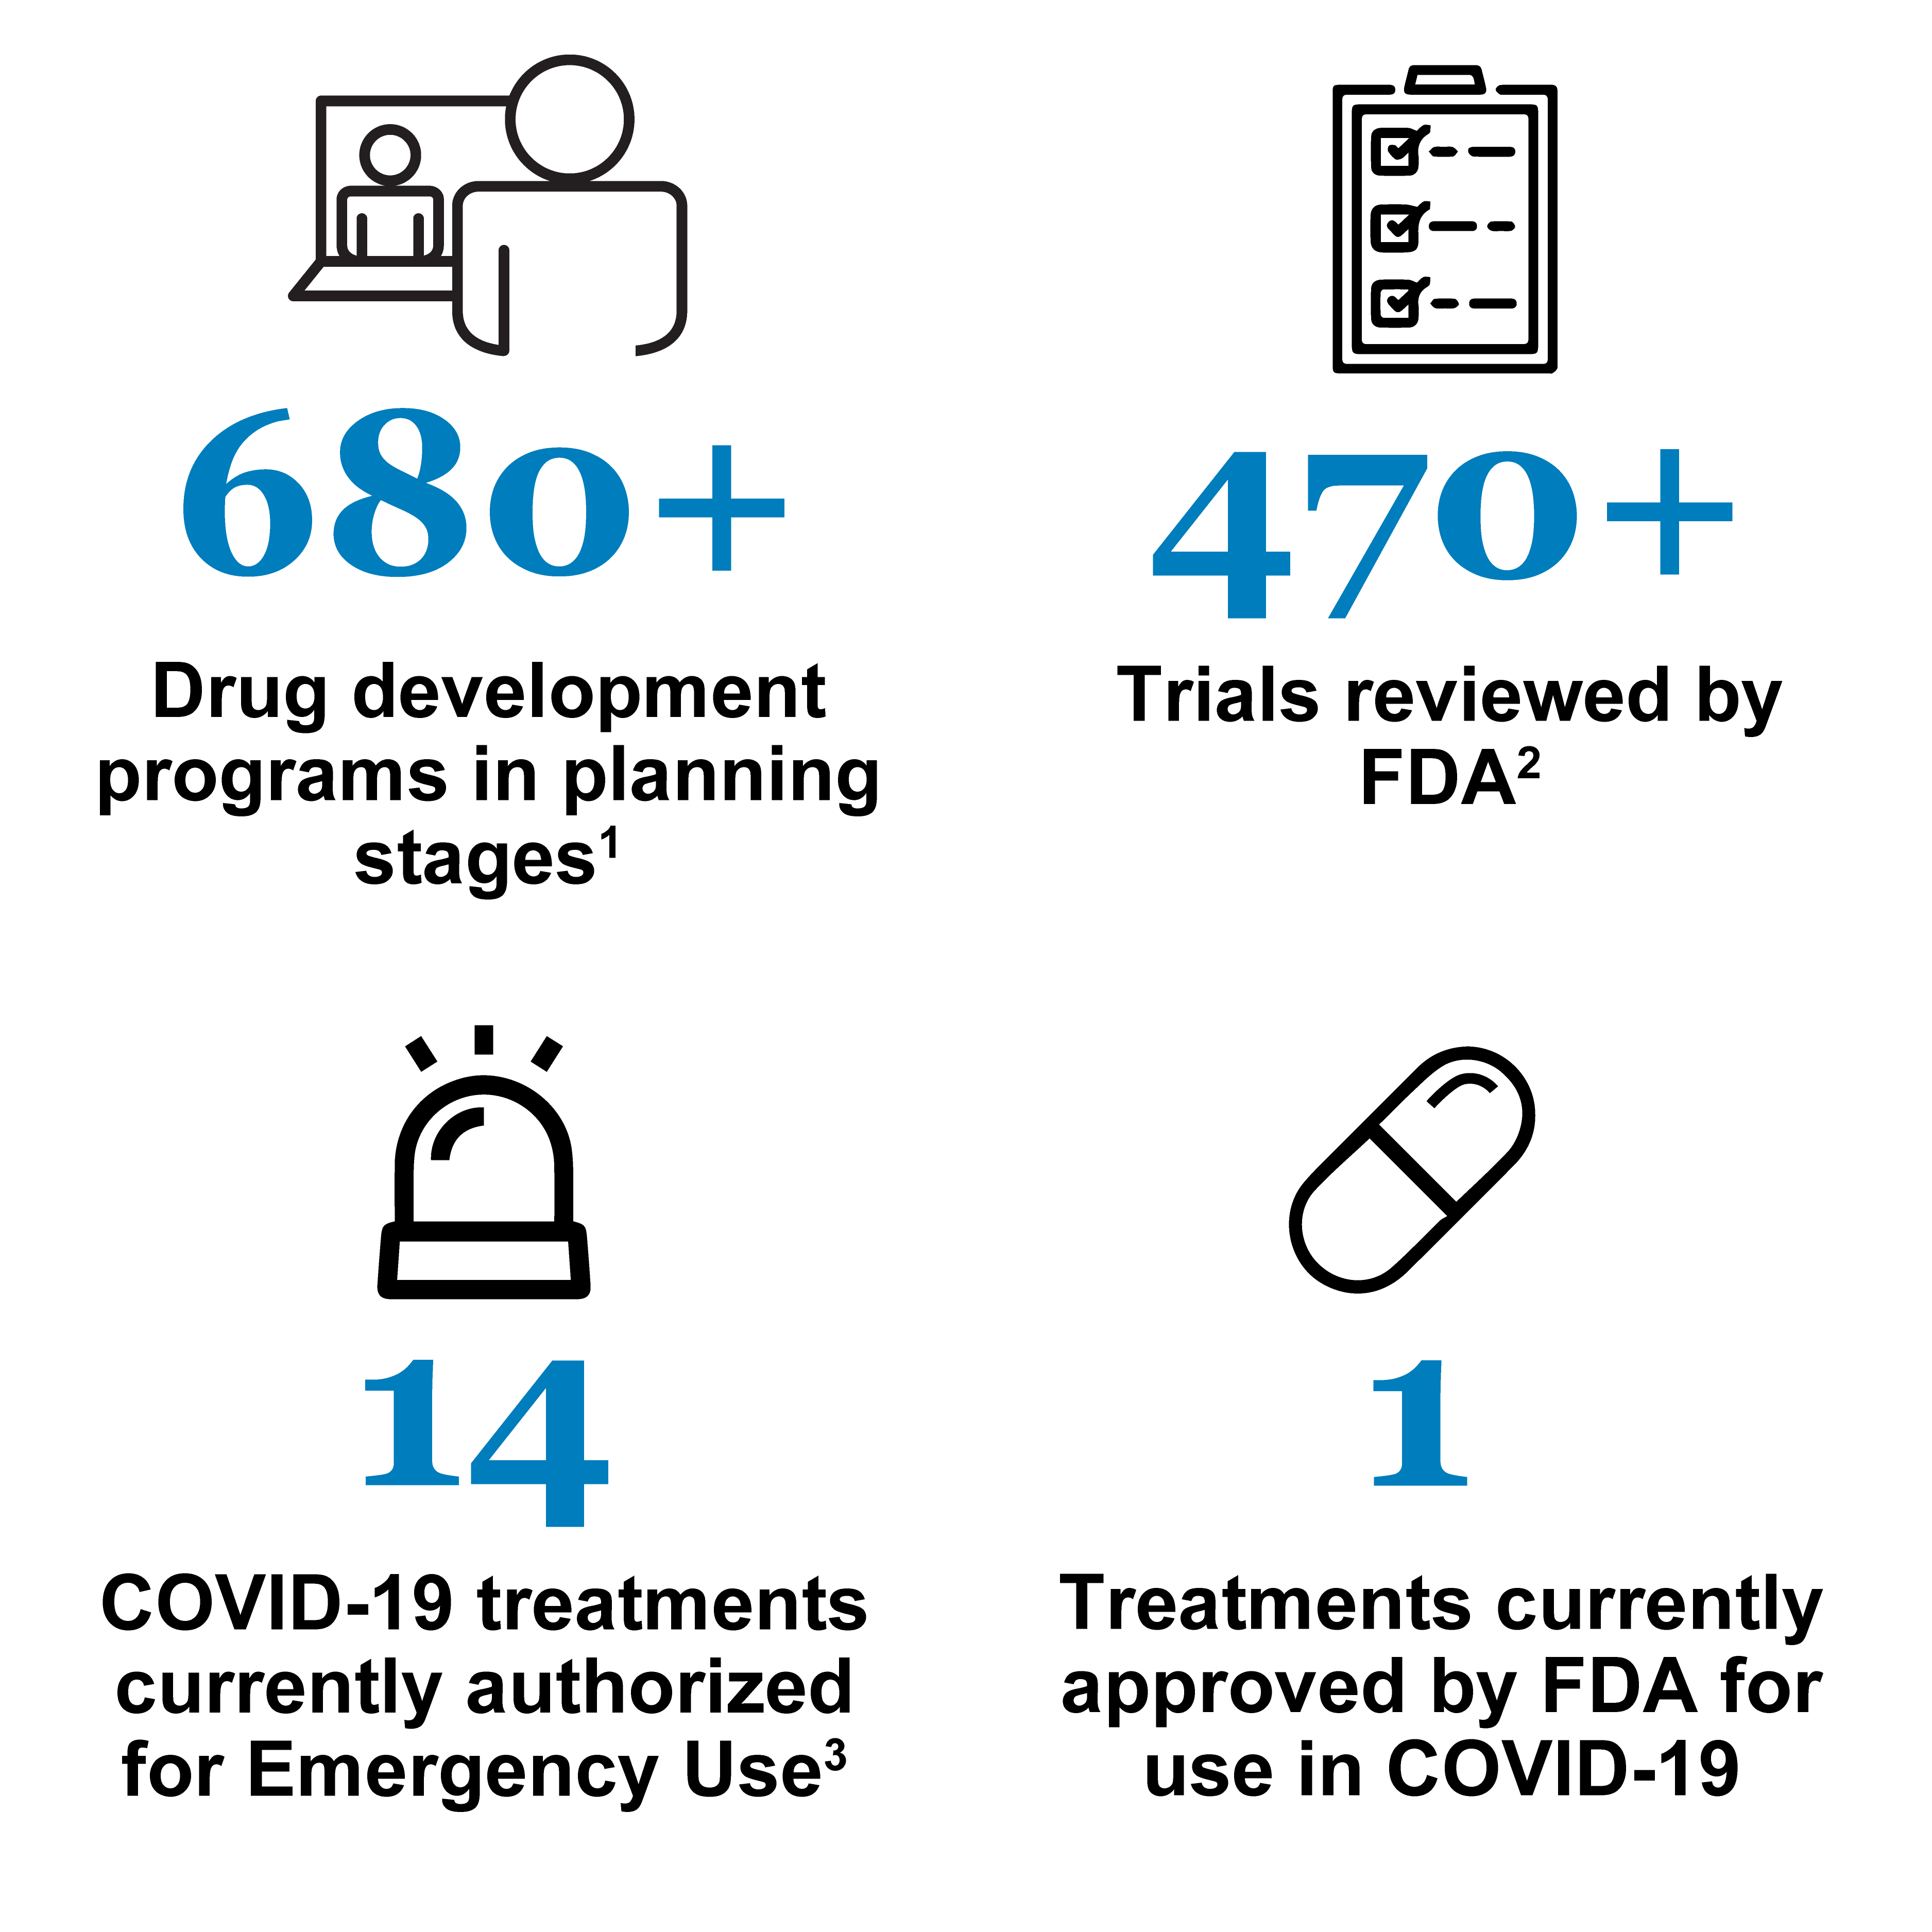 CTAP Dashboard: 680+ Drug Development programs in planning stages; 470+ Trials reviewed by FDA; 14 COVID-19 treatments currently authorized for Emergency Use; 1 Treatments currently approved by FDA for use in COVID-19